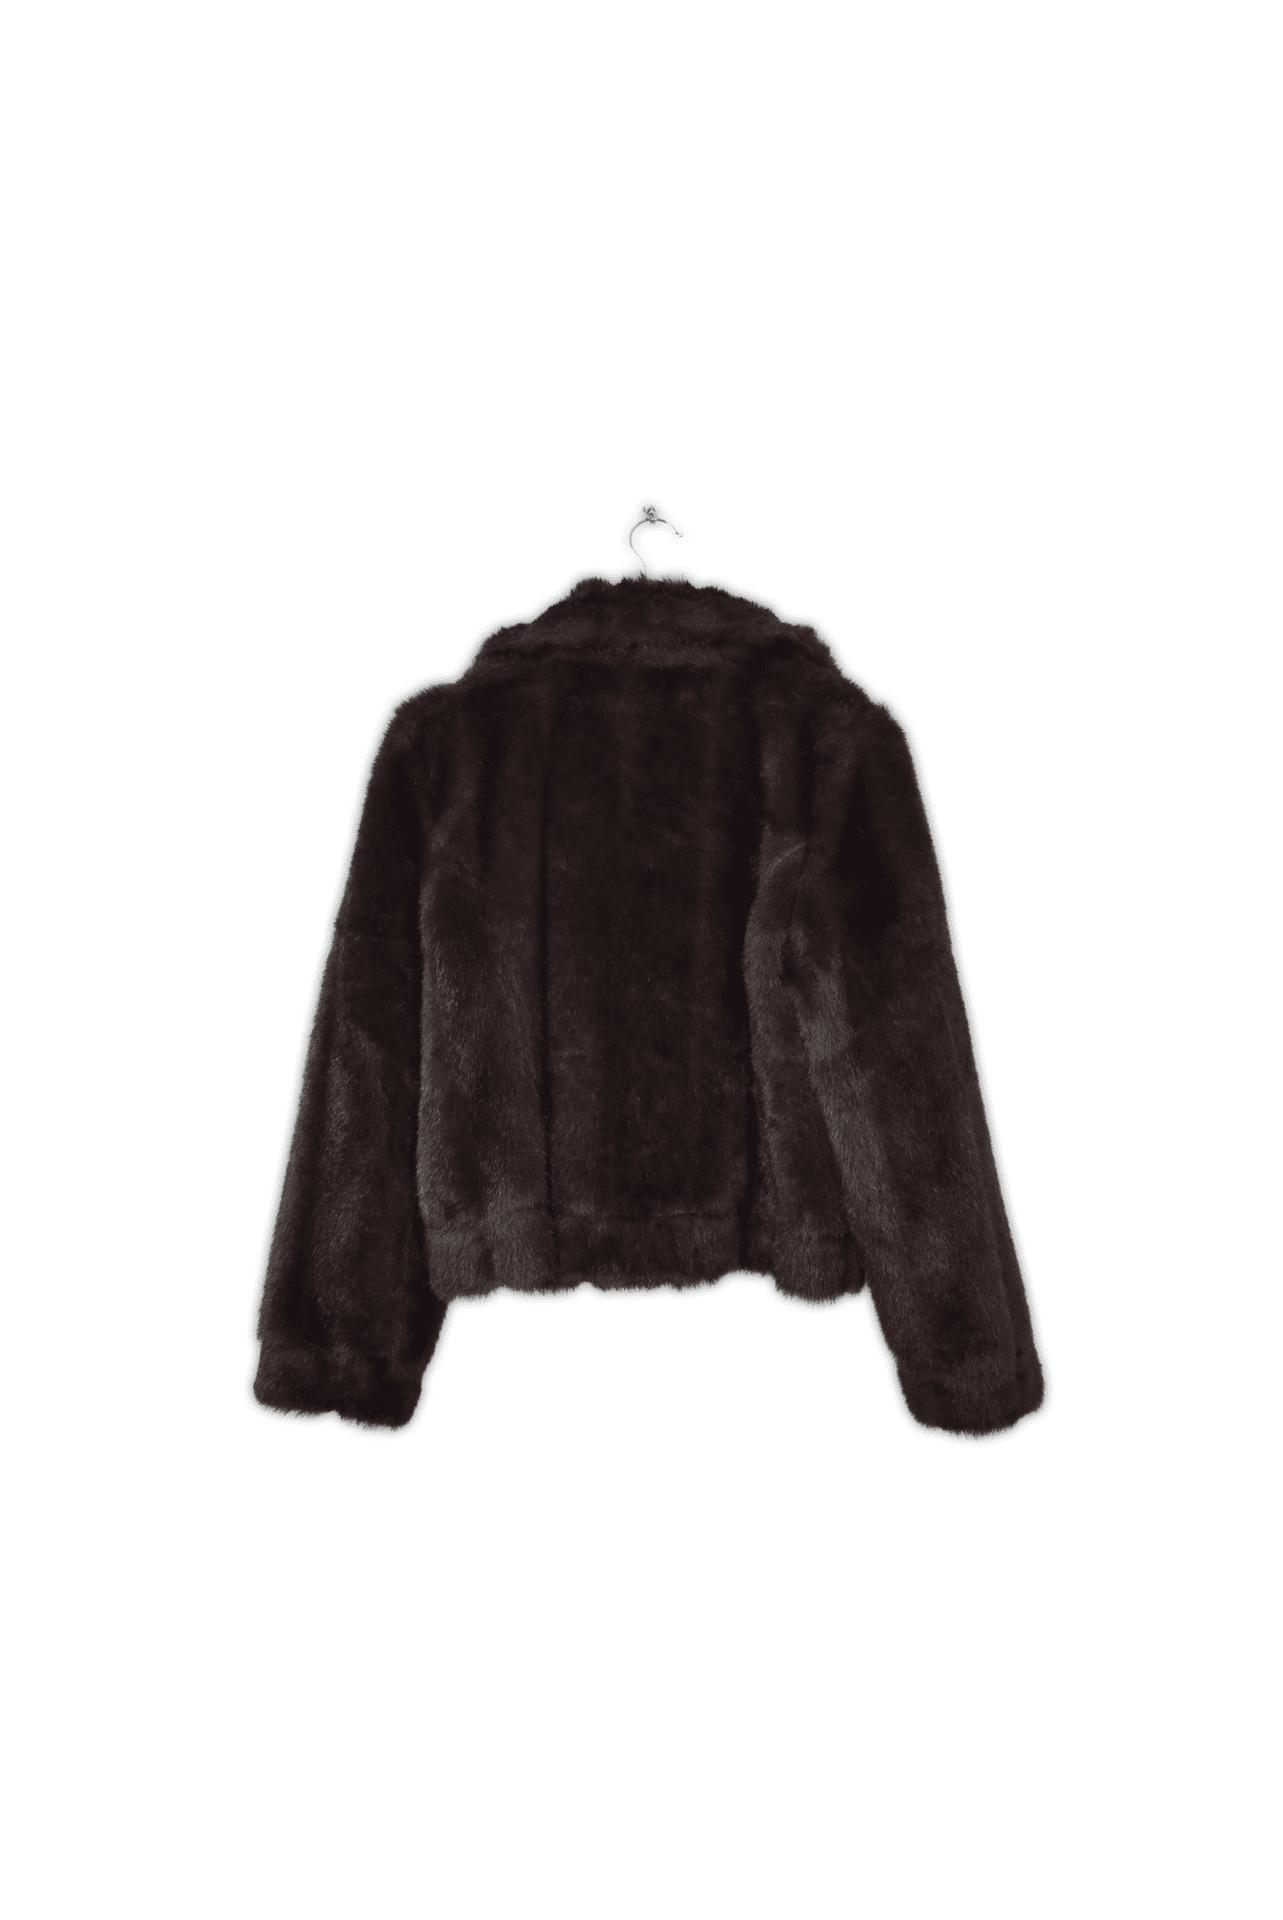 Soft and luxurious brown faux fur jacket